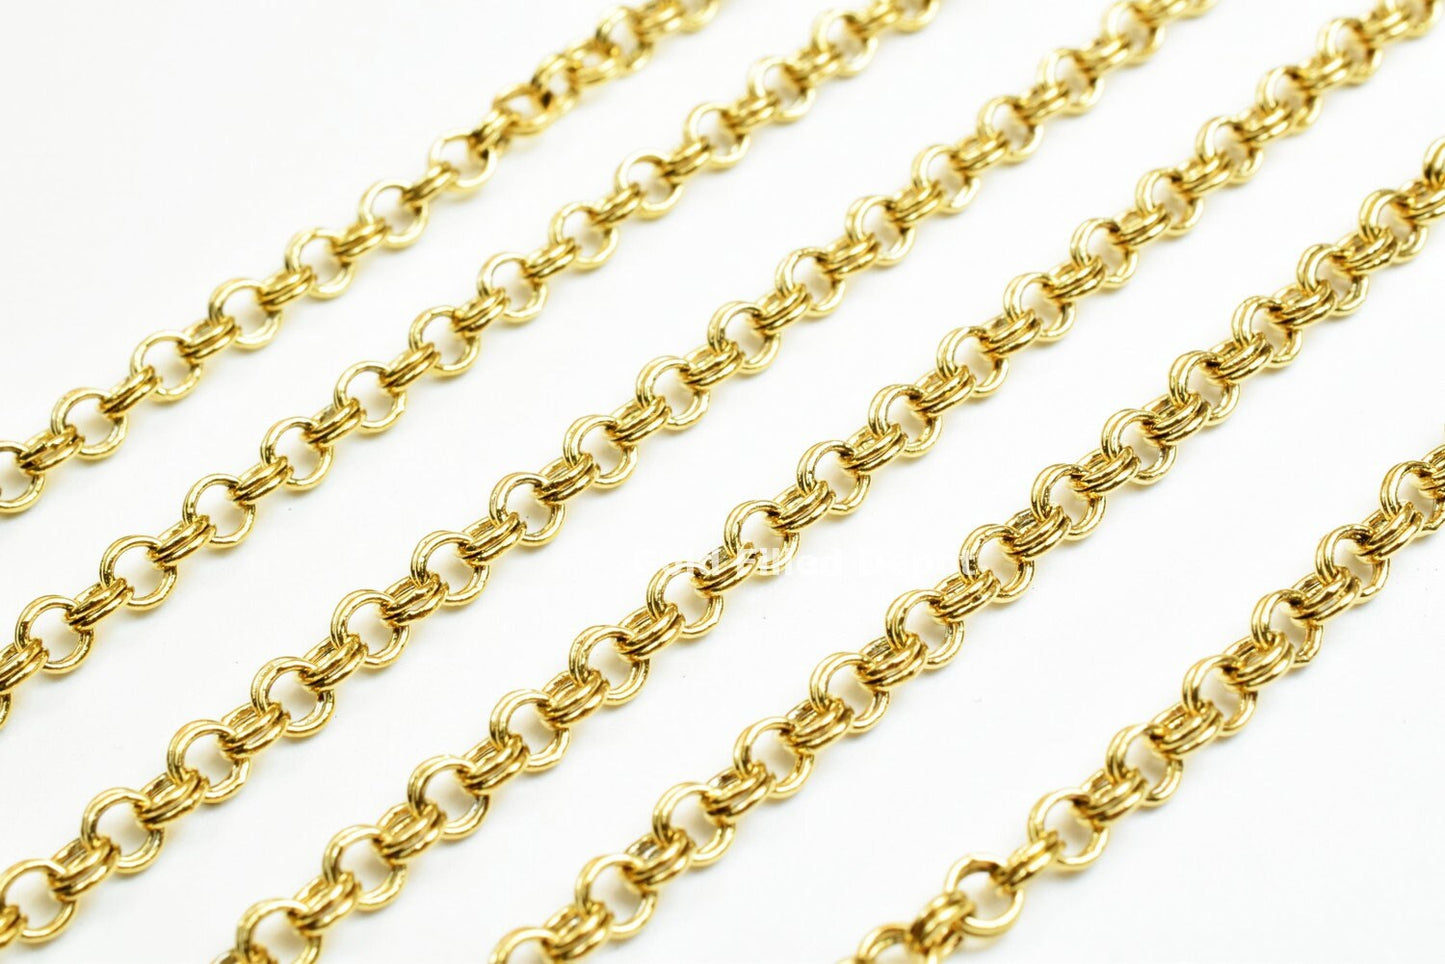 18K Gold Filled Double Rolo Cable Link Chain  personalize necklace Width 3mm Thickness 1mm findings for Jewelry supplies wholesale-3 Feet